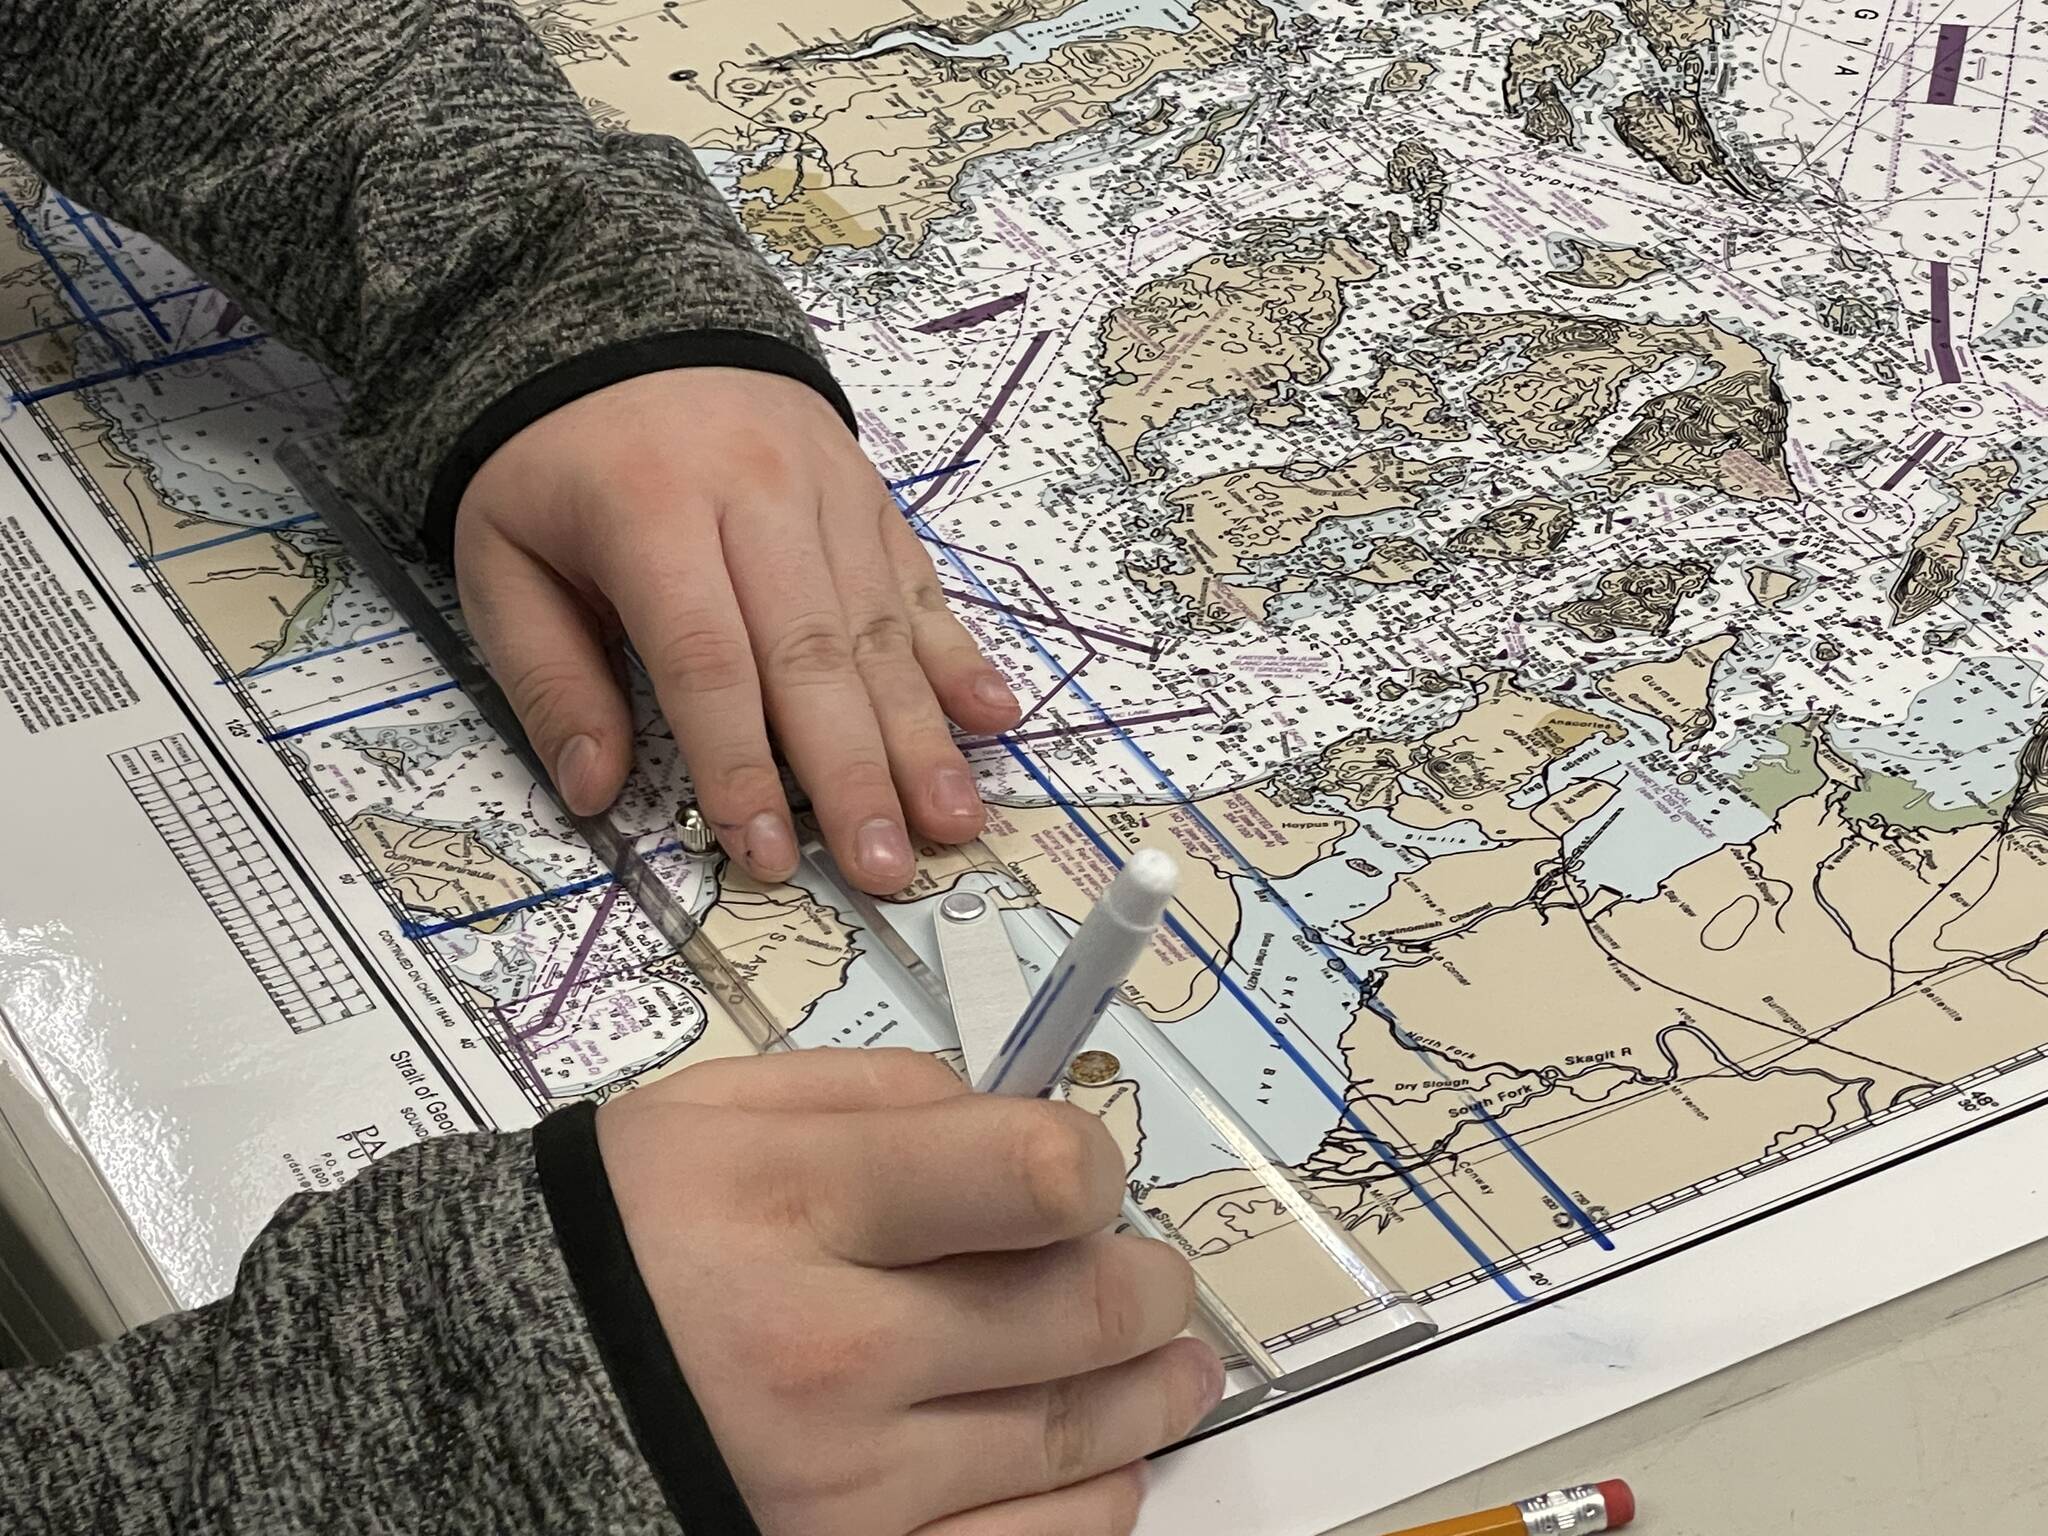 Evan Brockhoff works on a navigation exercise as part of the Ocosta High School’s Maritime afterschool program on Nov. 9. (Michael S. Lockett / The Daily World)